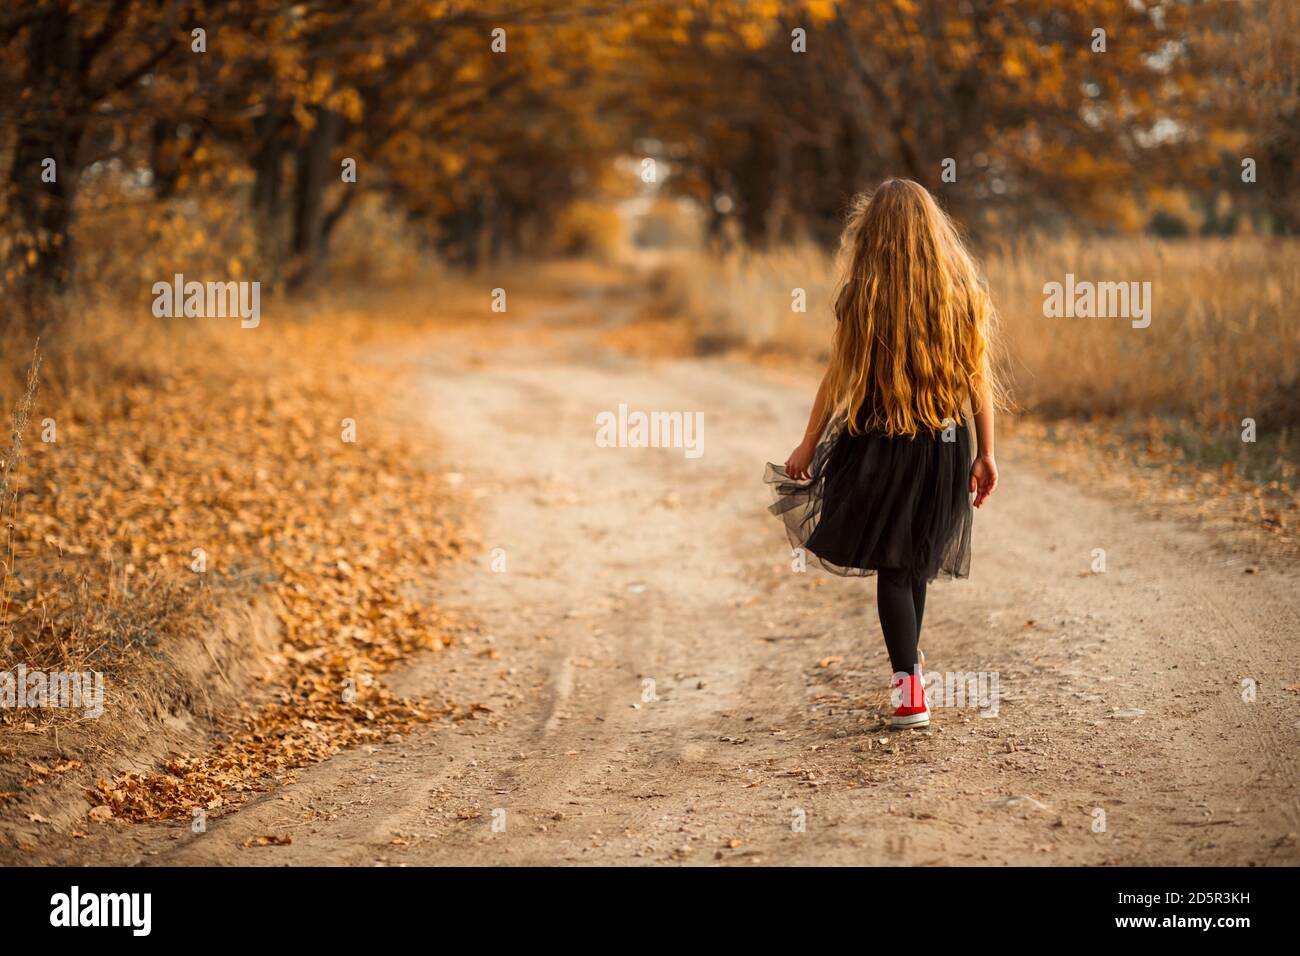 A teenage girl with long curly hair is walking along a forest path. Stock Photo